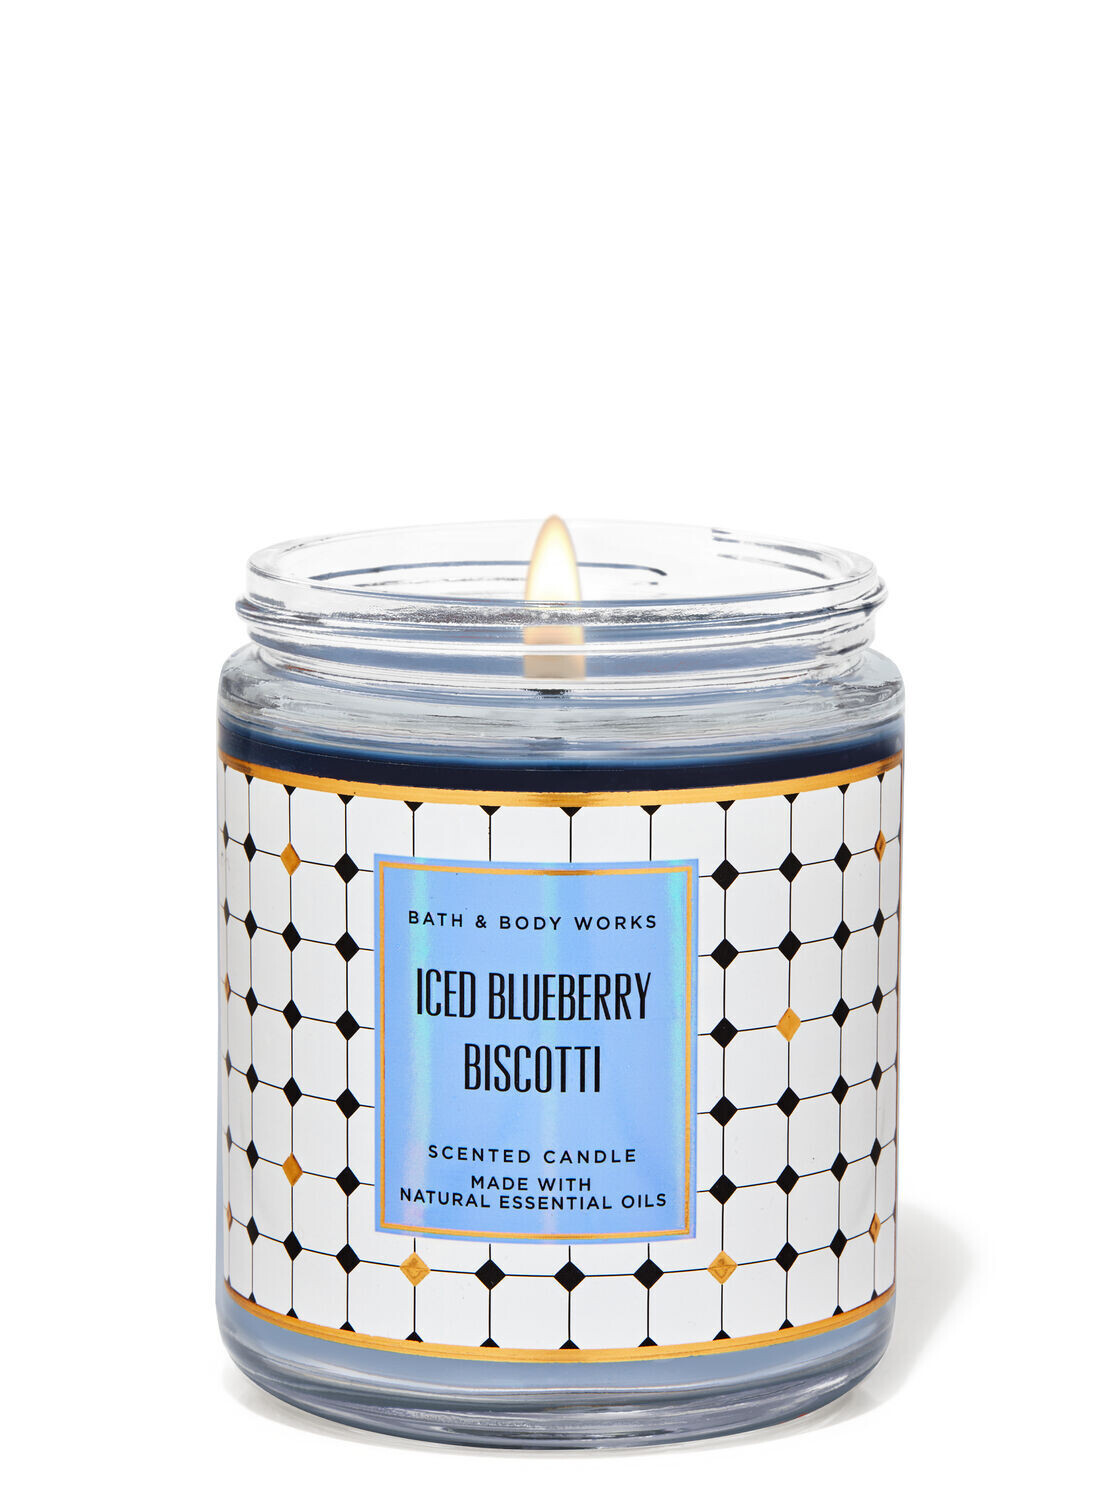 Bath and body works single wick candle- ICED BLUEBERRY BISCOTTI